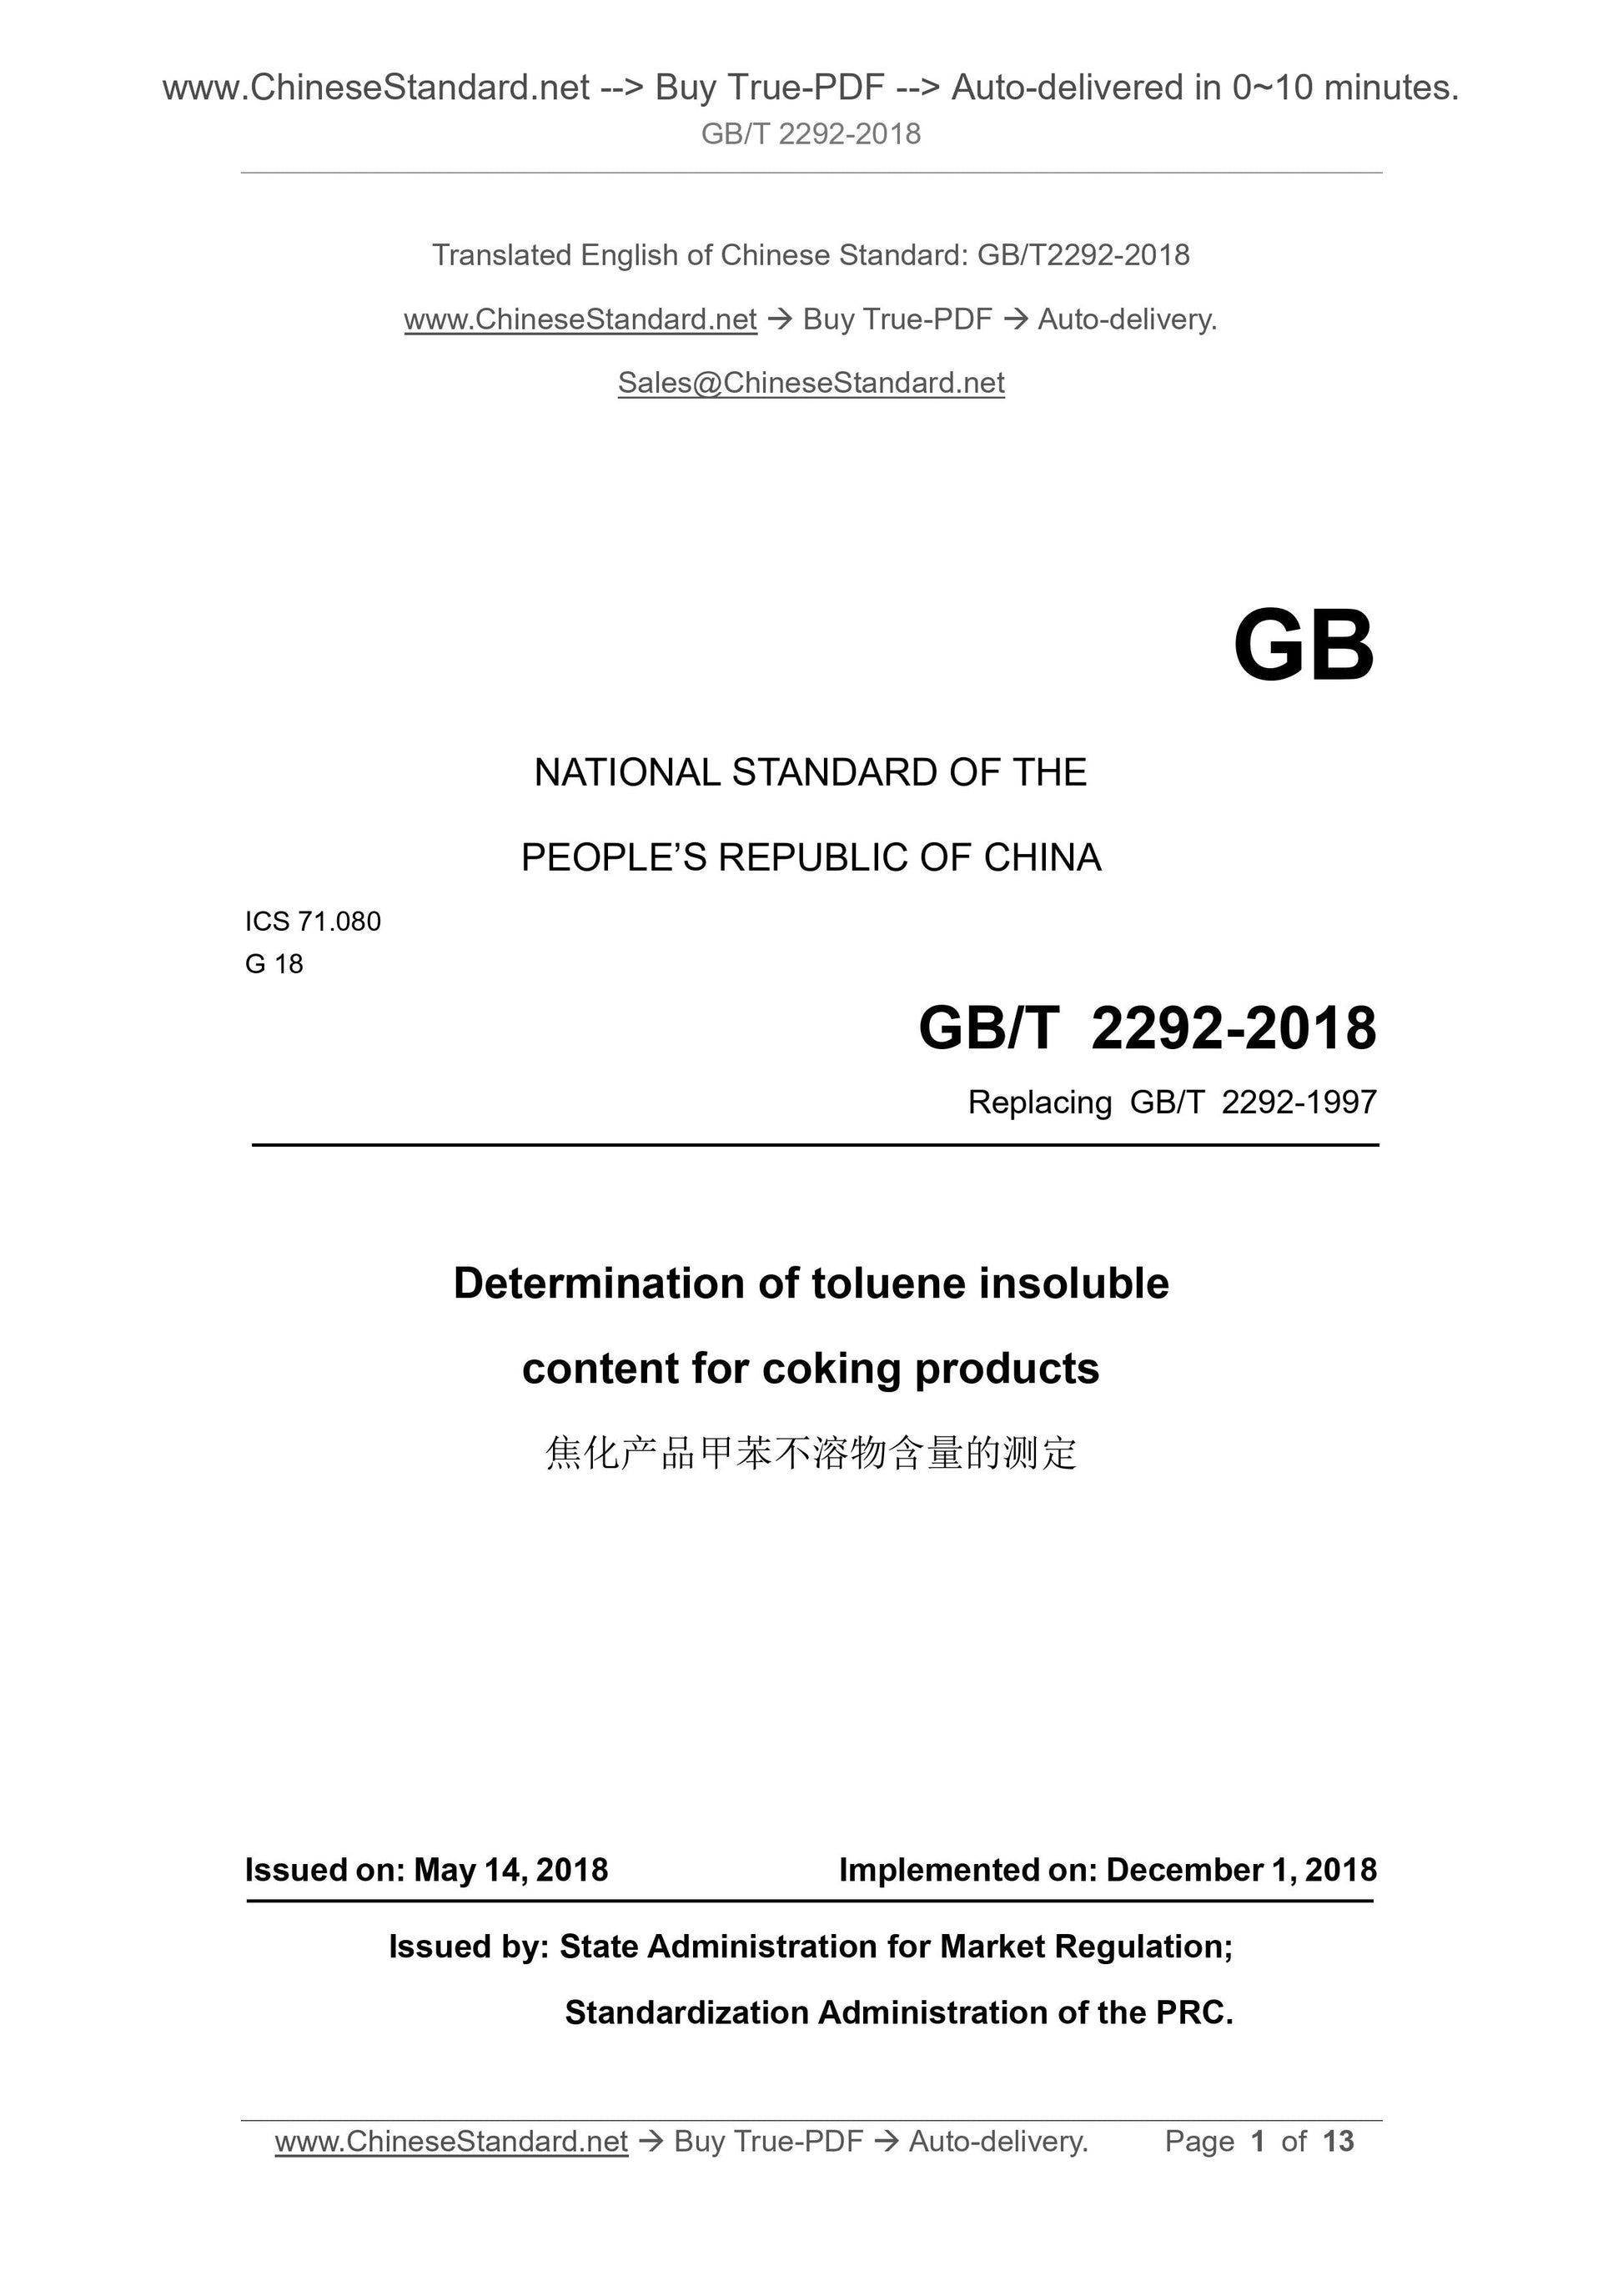 GB/T 2292-2018 Page 1